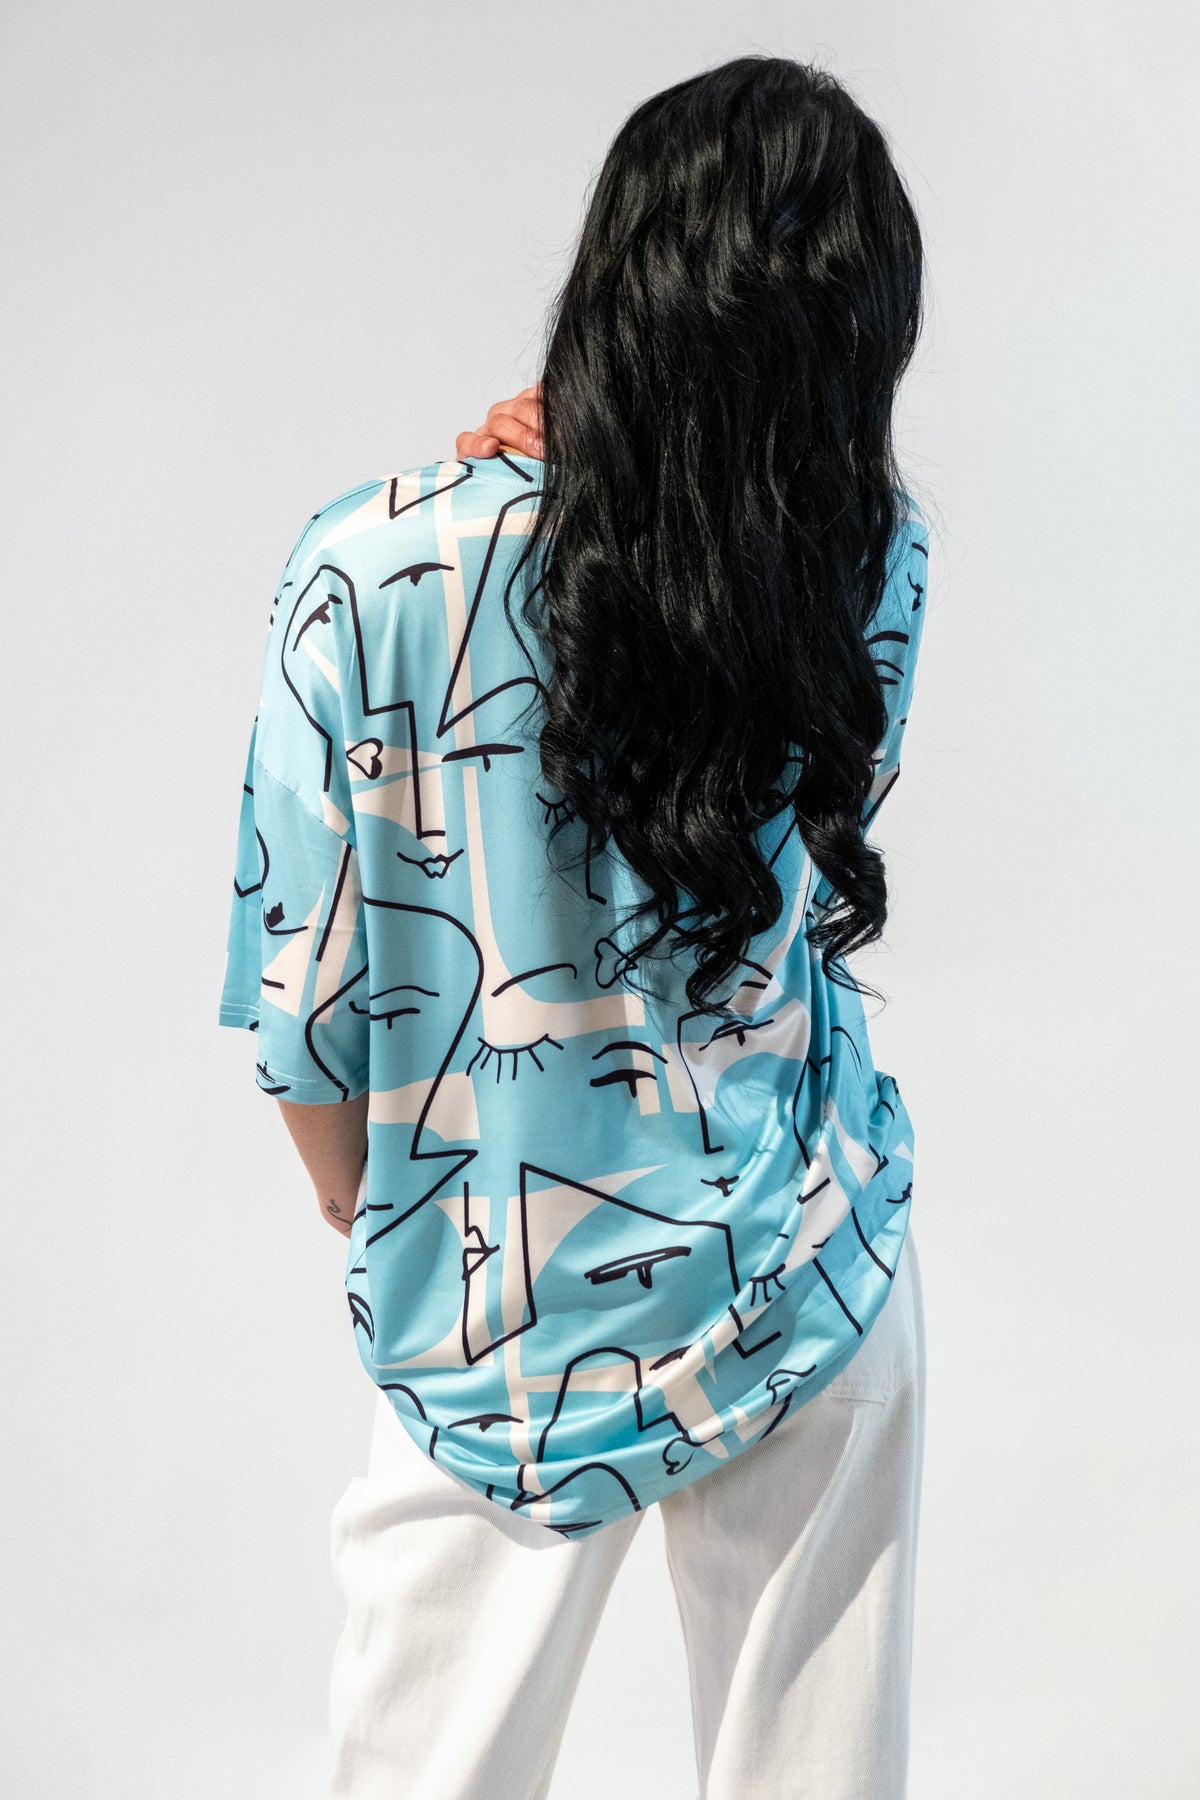 Model wearing a blue oversized t-shirt with an abstract faces graphic design. Back.